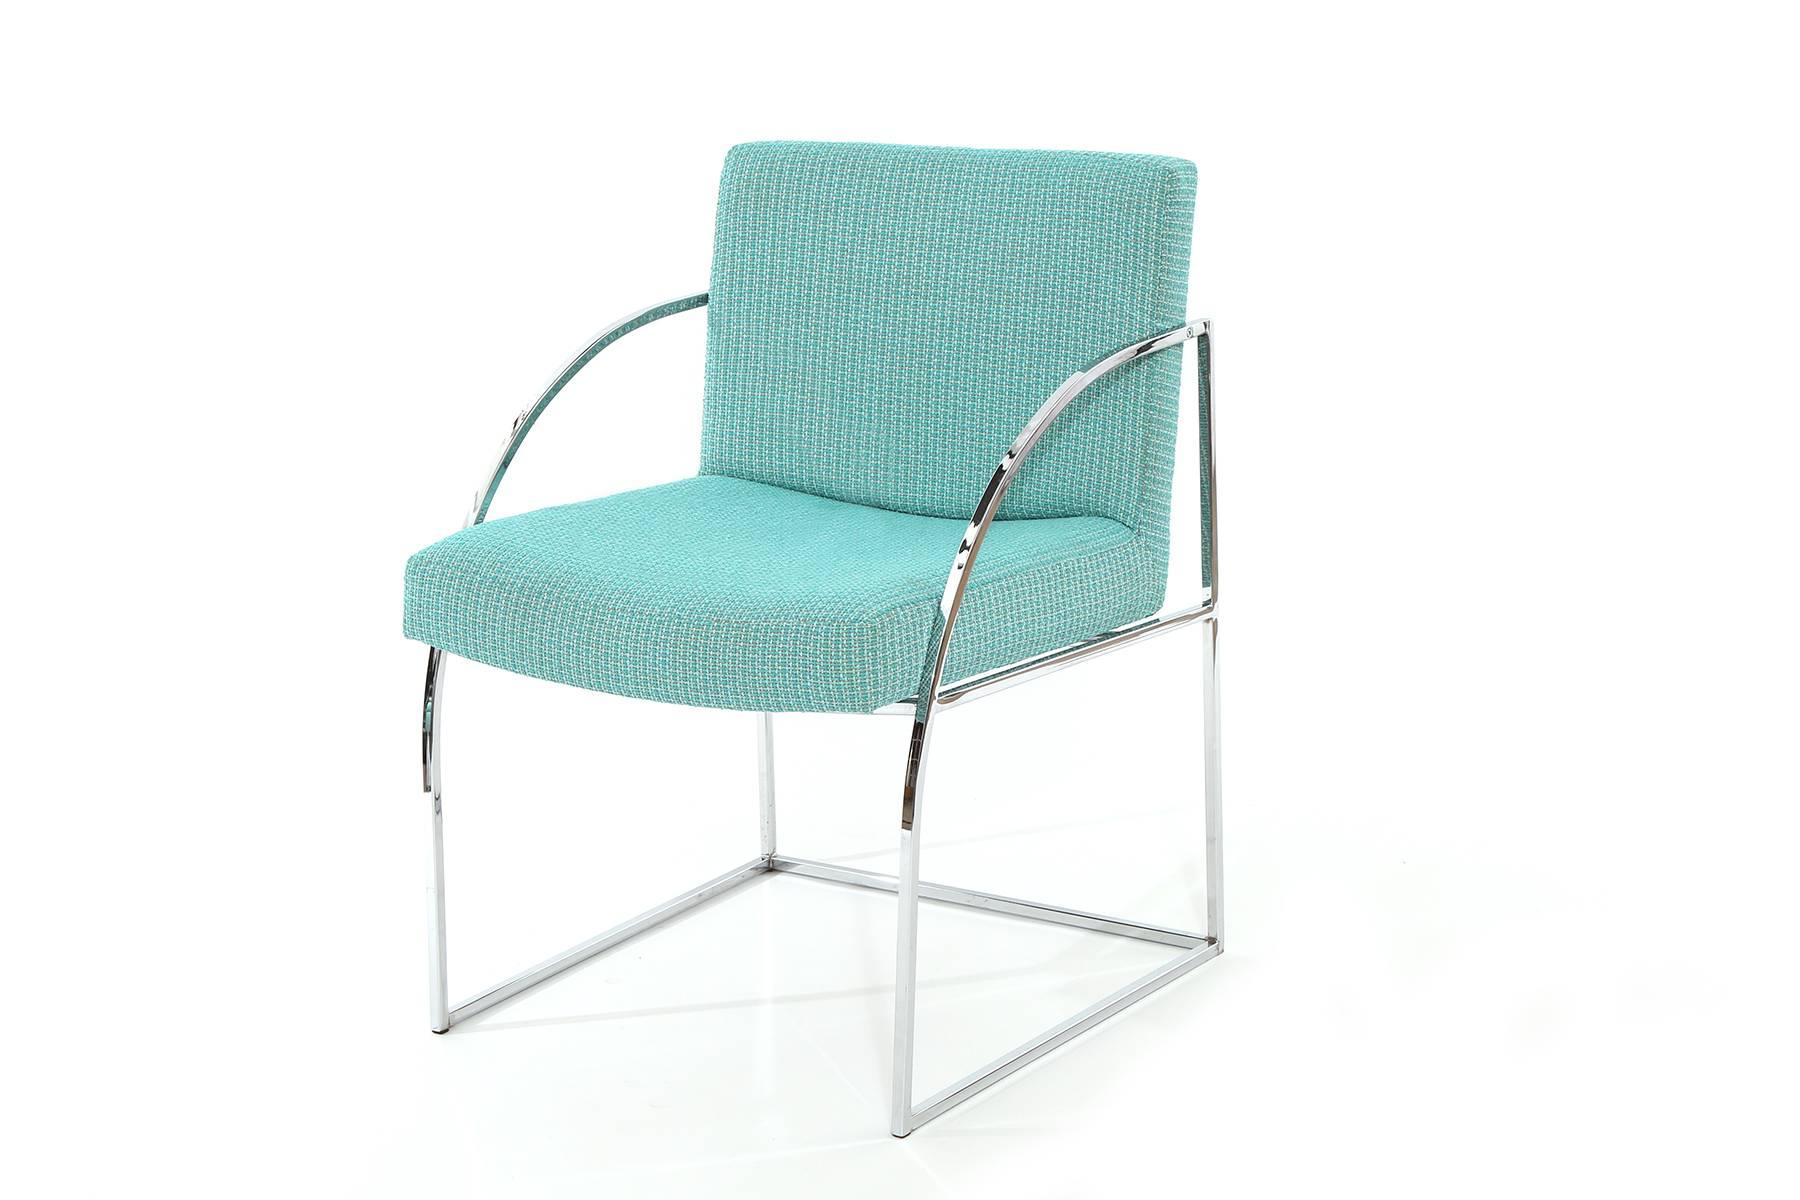 Four Milo Baughman for Thayer Coggin dining chairs, circa early 1970s. These examples have polished chrome frames and have been newly upholstered in a sky blue textile. Price listed is for the set of four.